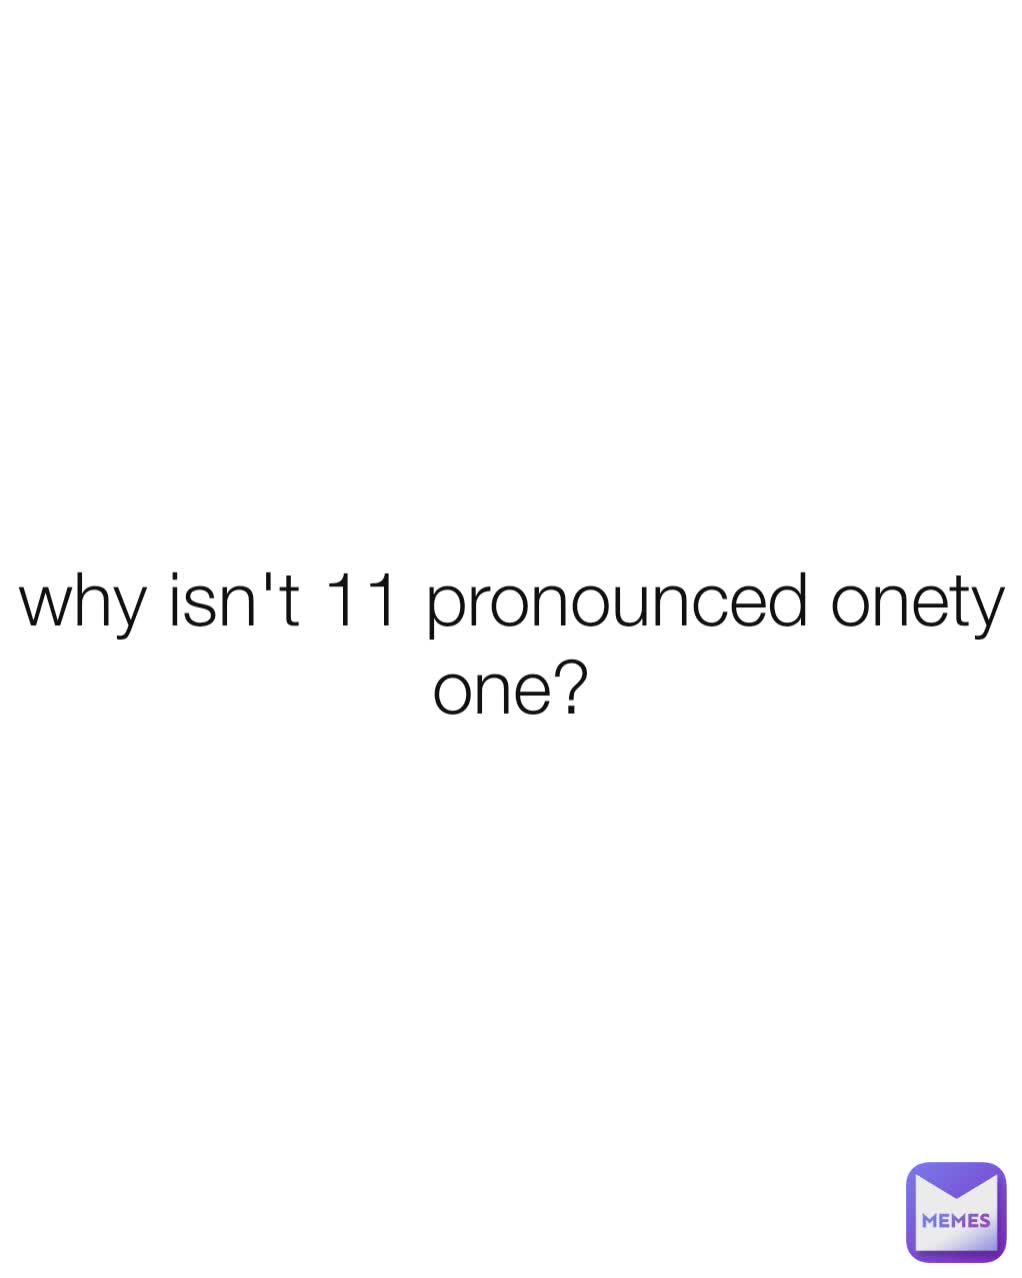 why isn't 11 pronounced onety one?